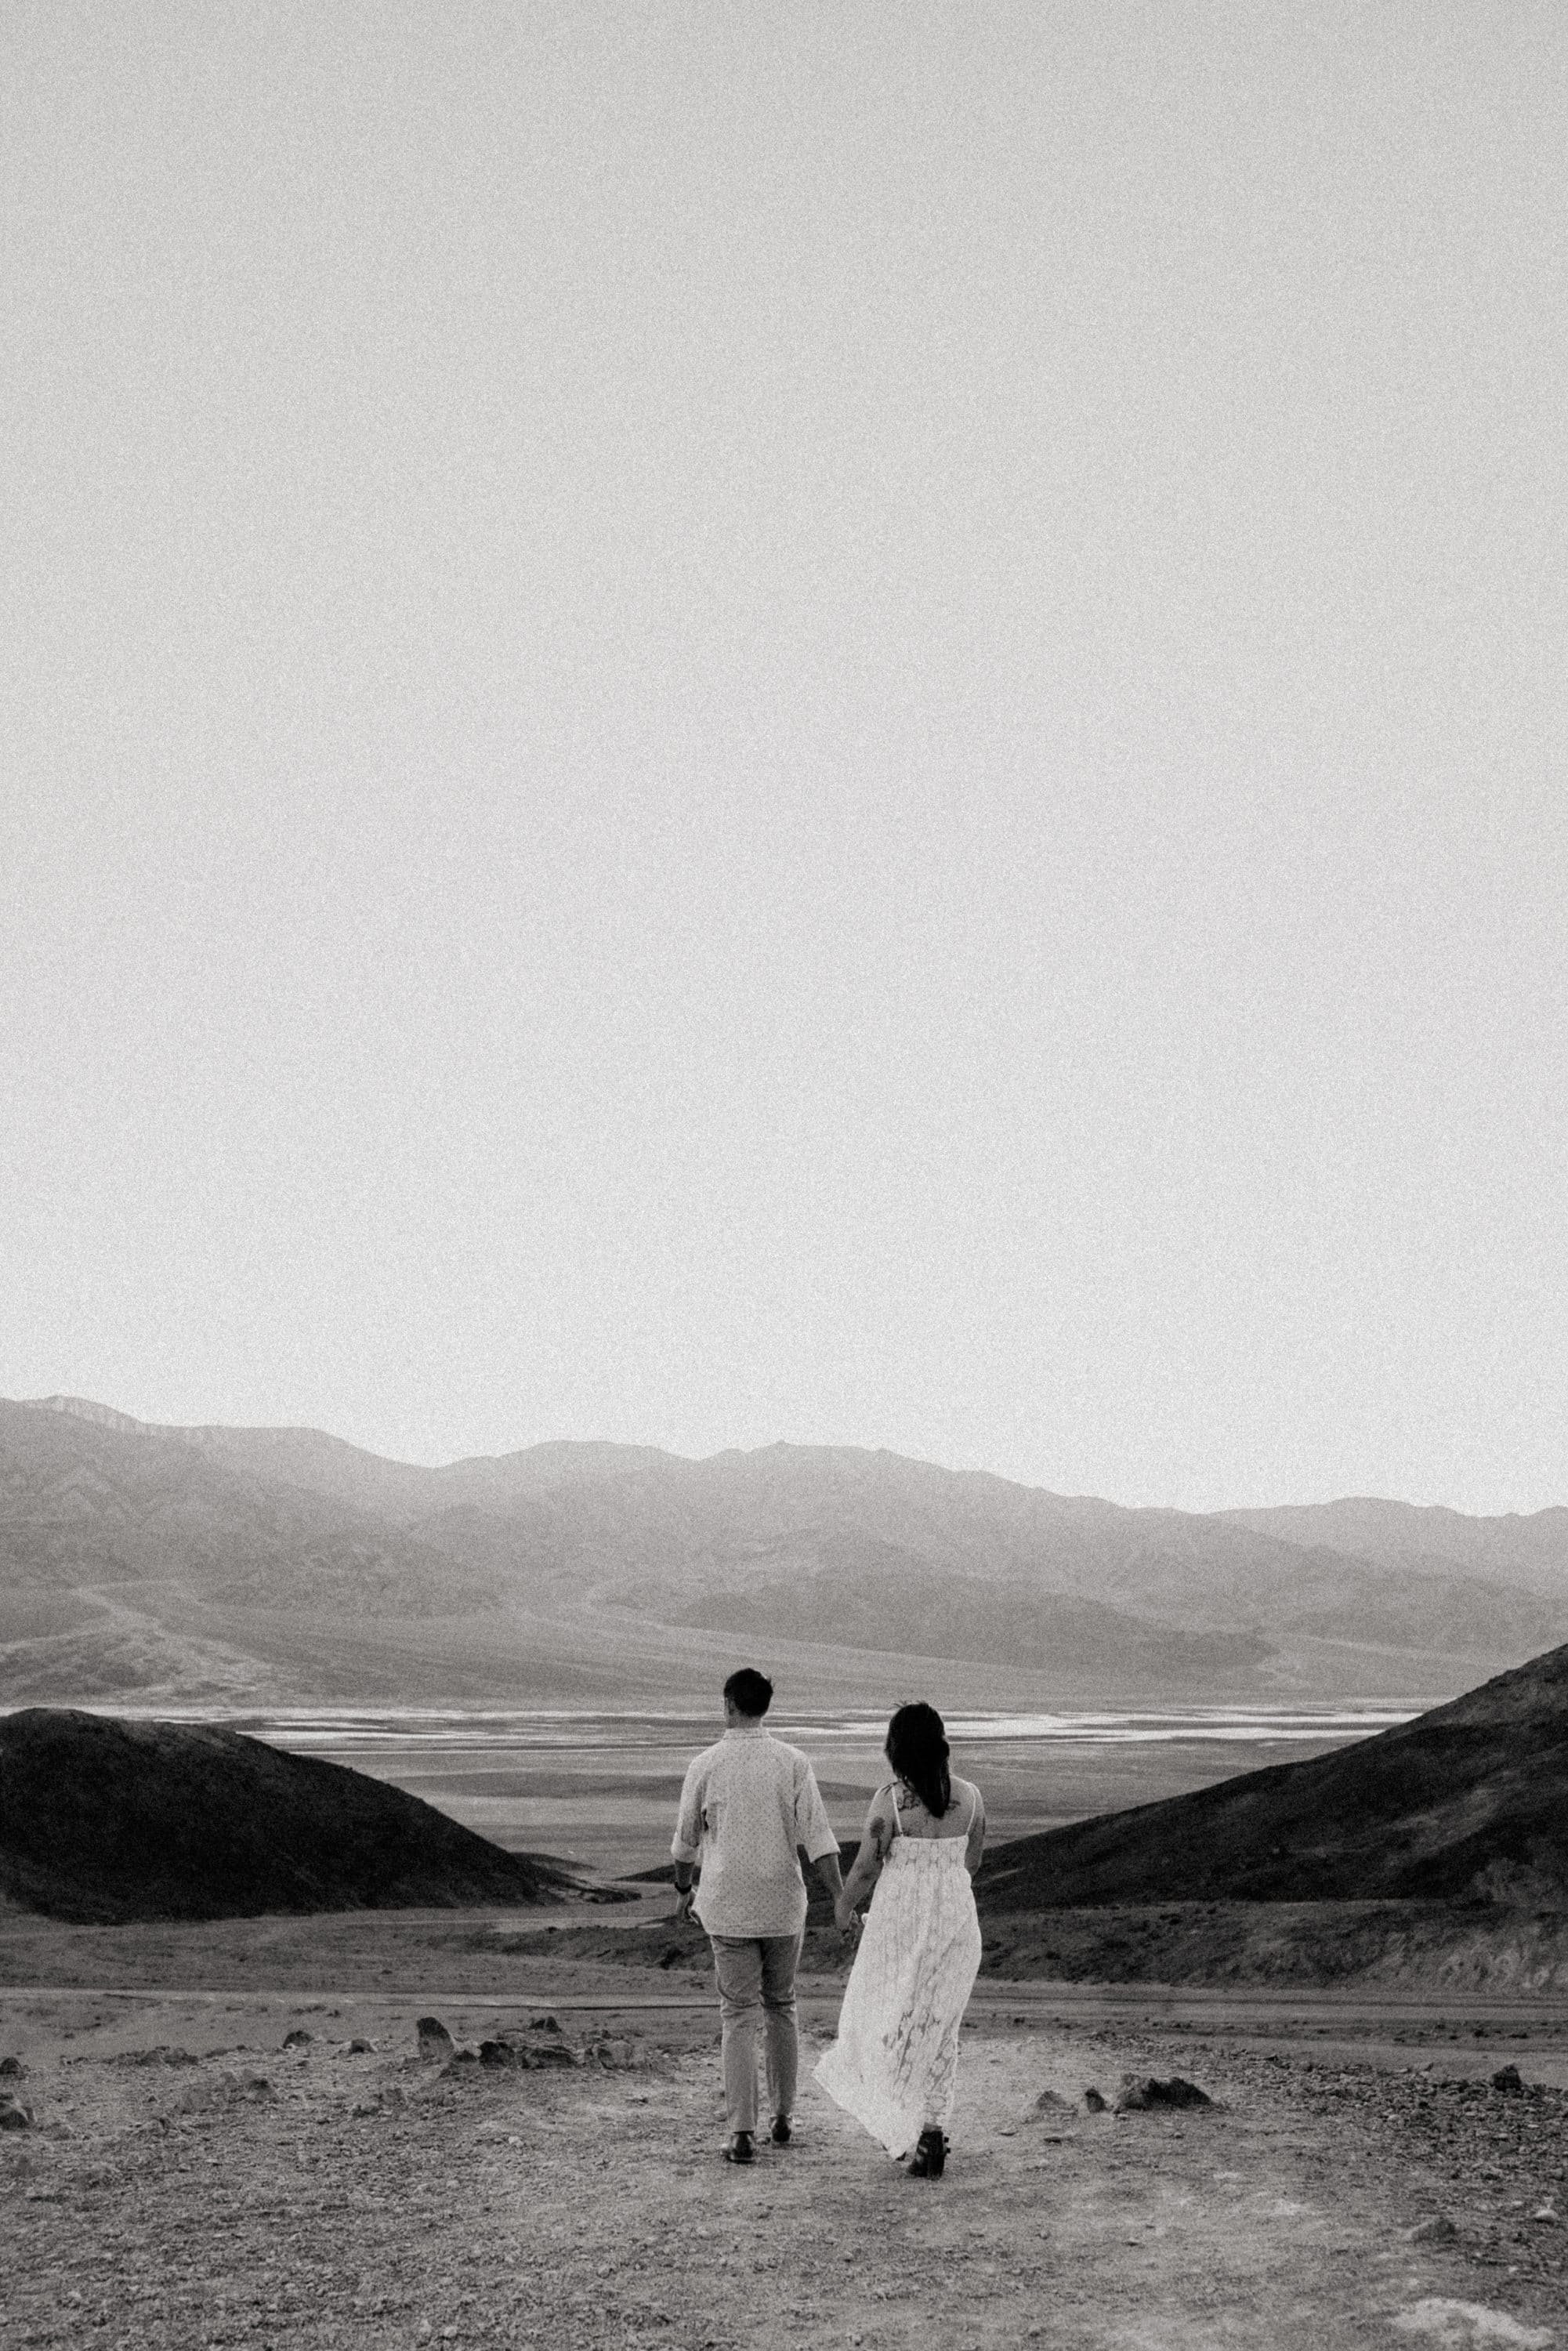 Hand-in-hand, exploring the otherworldly landscapes of Death Valley National Park.